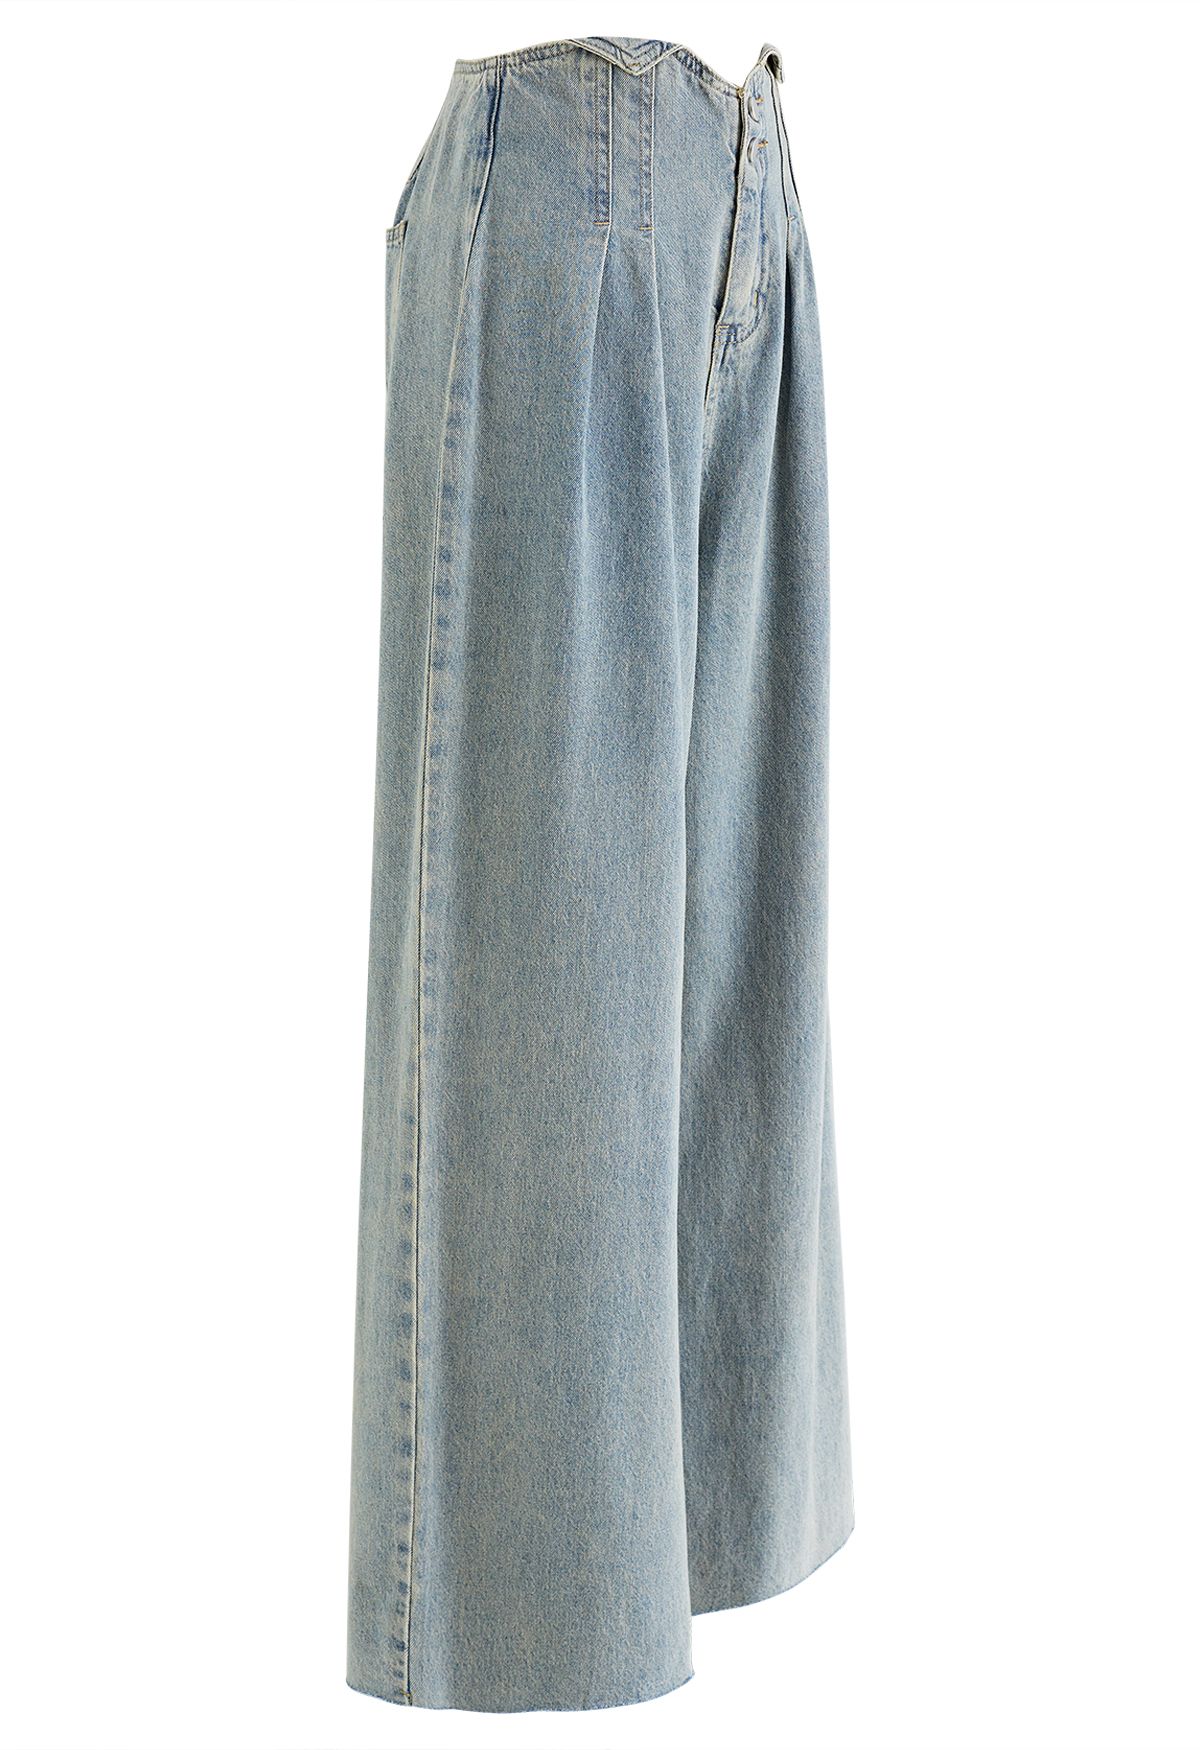 Notched Edge Pleated Wide-Leg Jeans in Light Blue